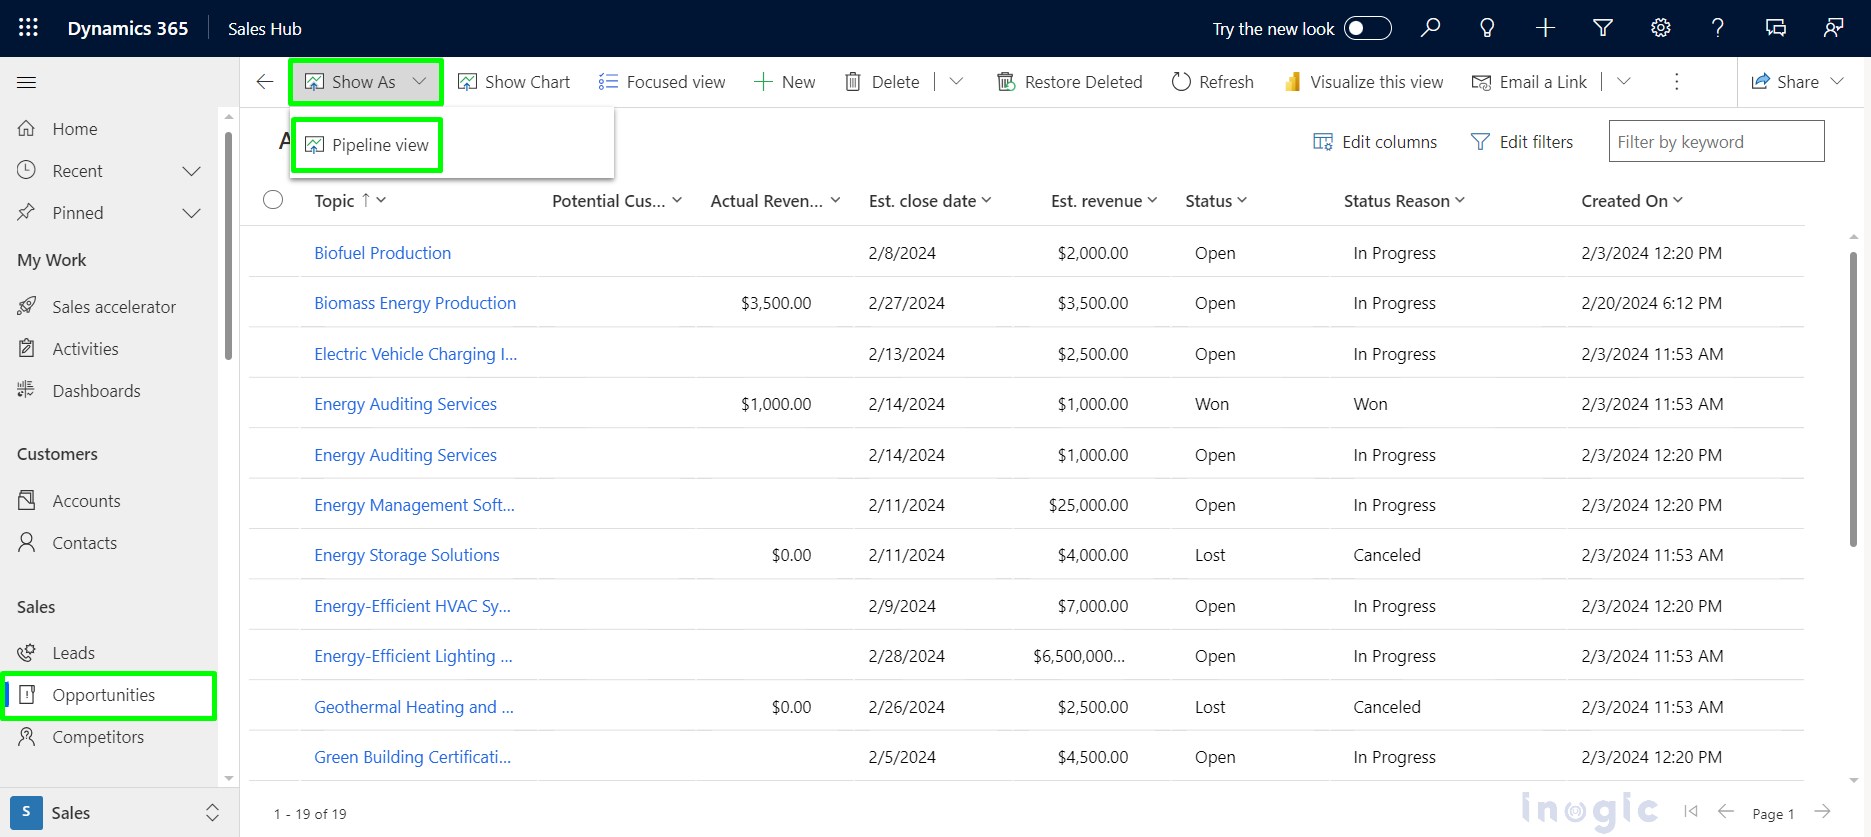 Group Opportunities for better analysis by aggregating the numeric fields in Dynamics 365 Sales